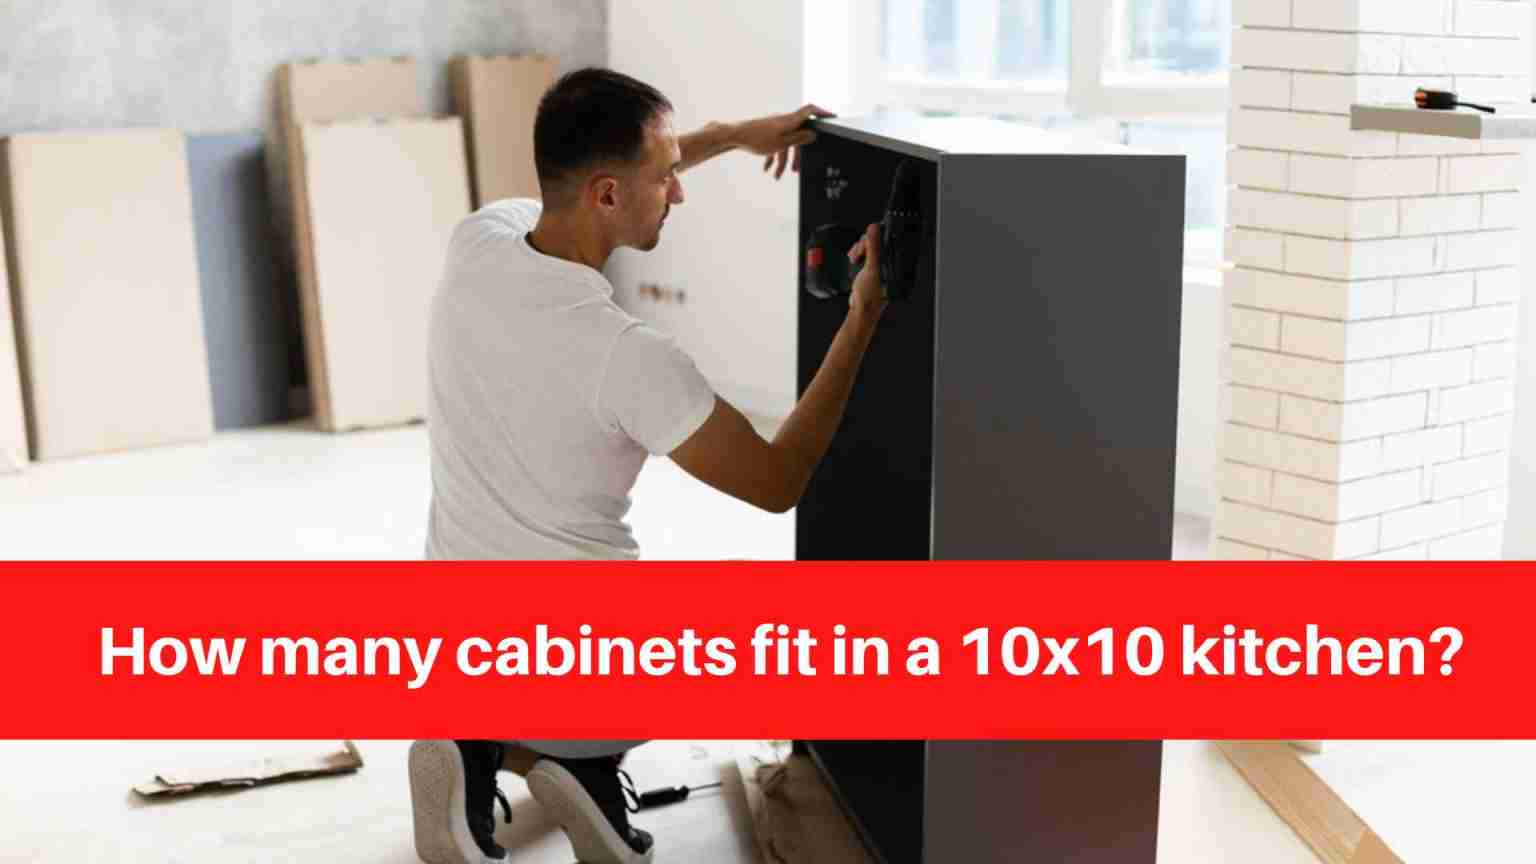 How many cabinets fit in a 10x10 kitchen